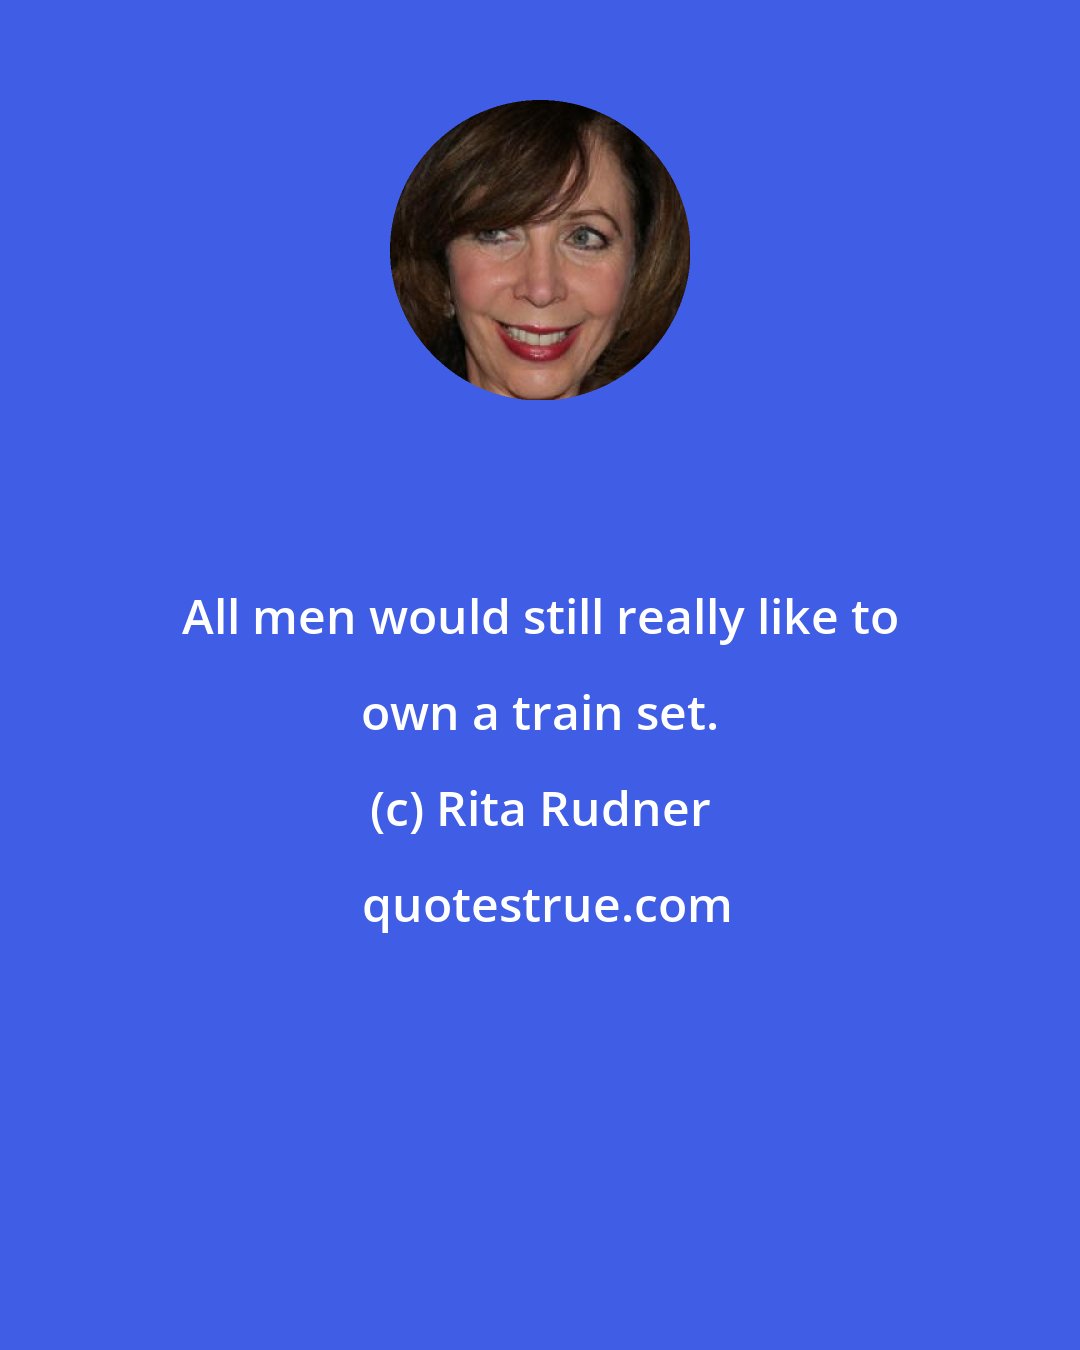 Rita Rudner: All men would still really like to own a train set.